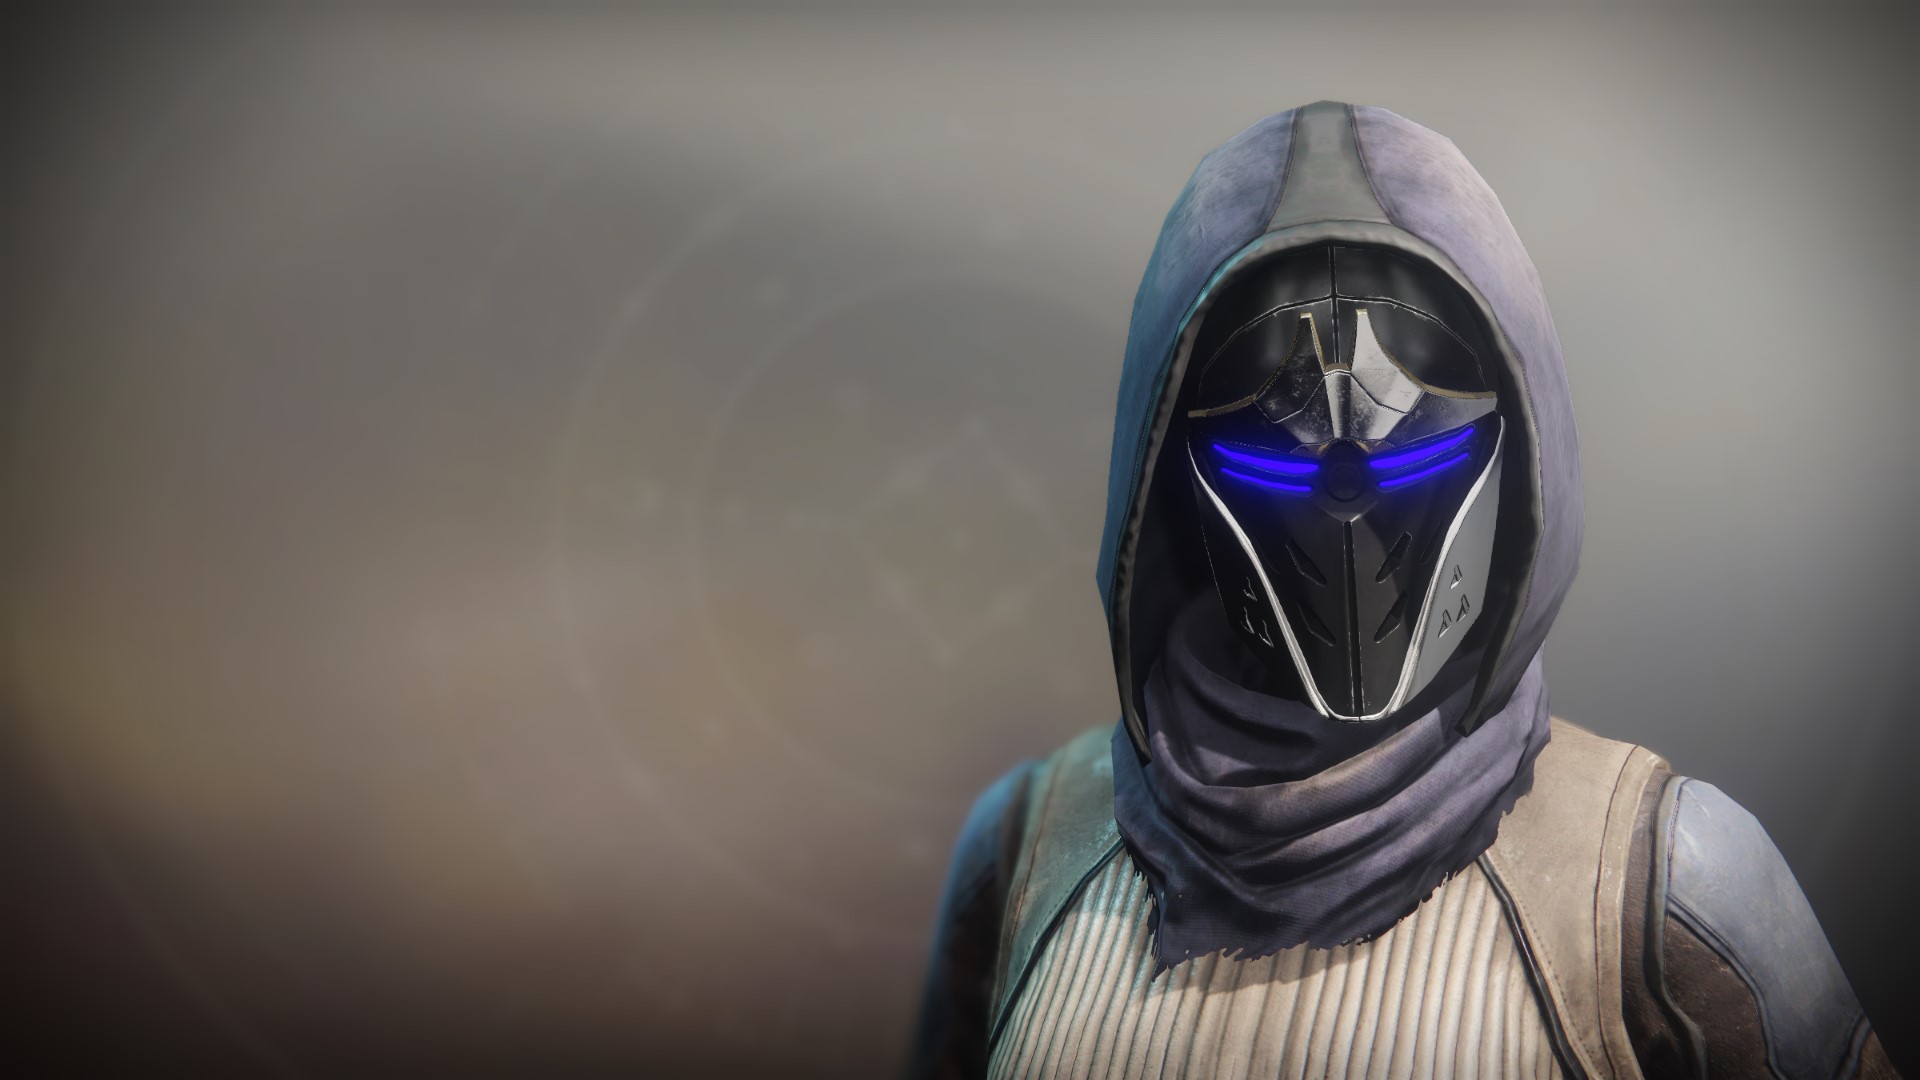 An in-game render of the Virtuous Mask.